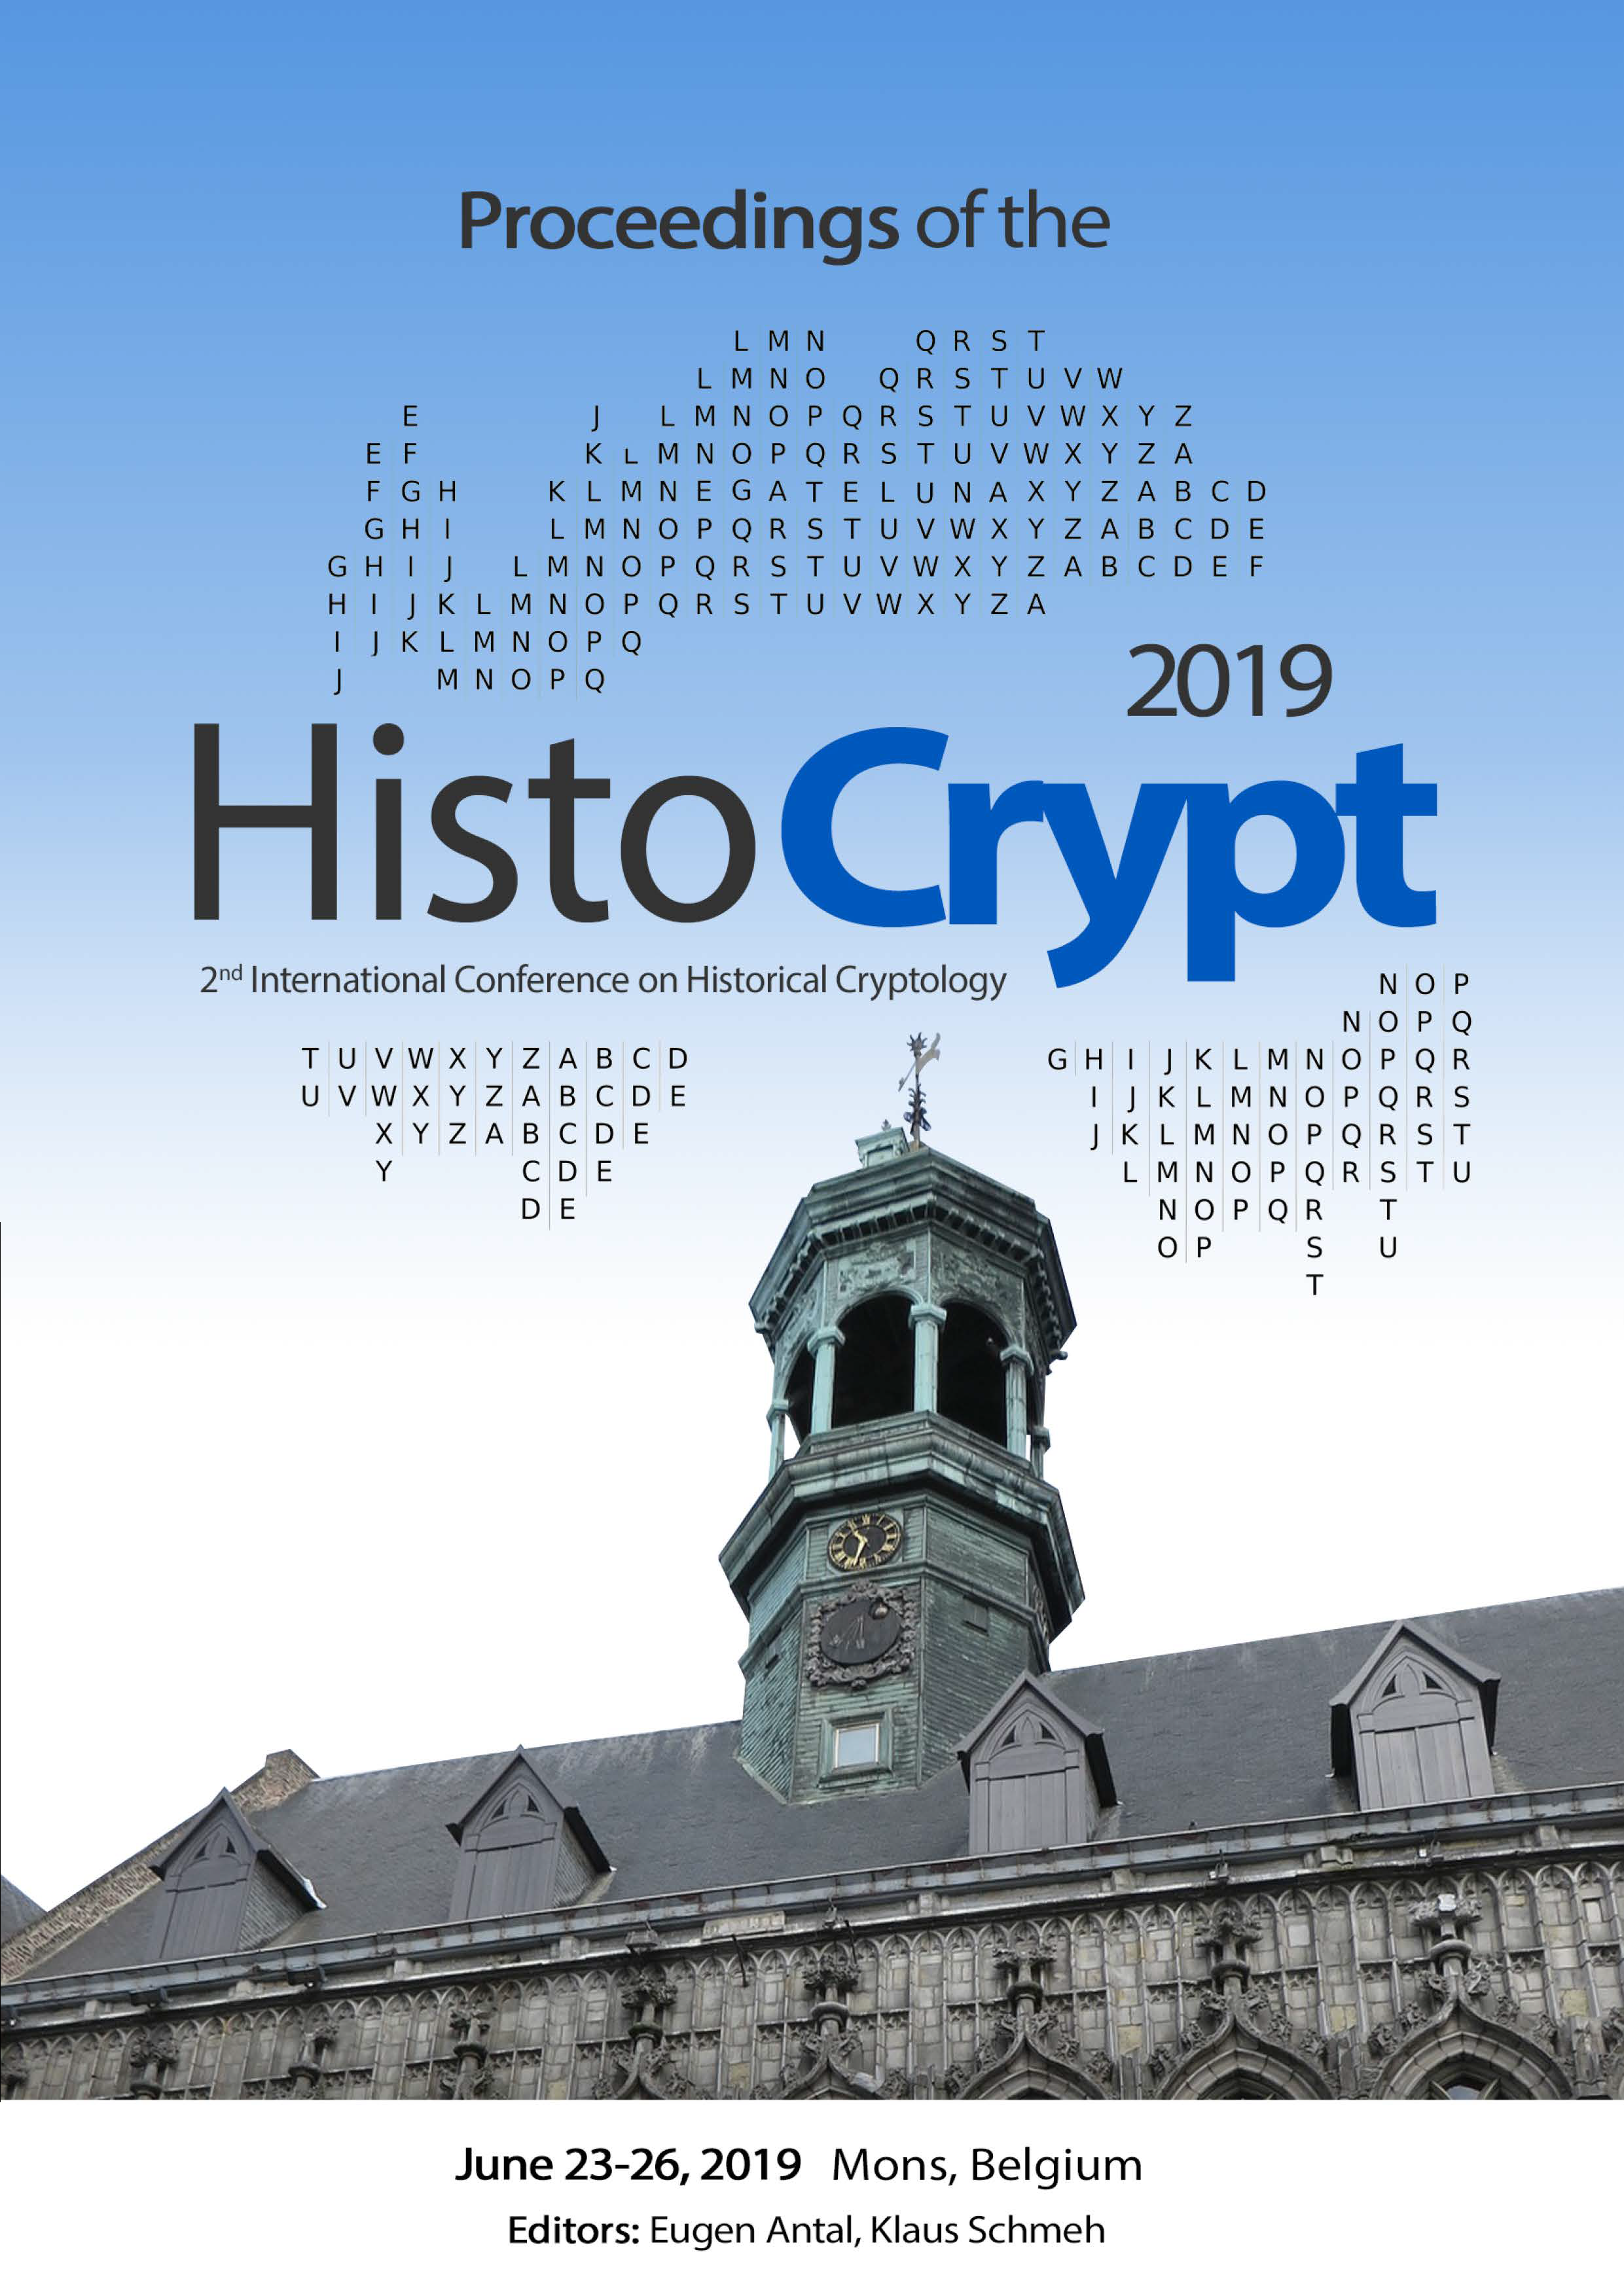 					View Proceedings of the 2nd International Conference on Historical Cryptology, HistoCrypt 2019, June 23-26, 2019, Mons, Belgium
				